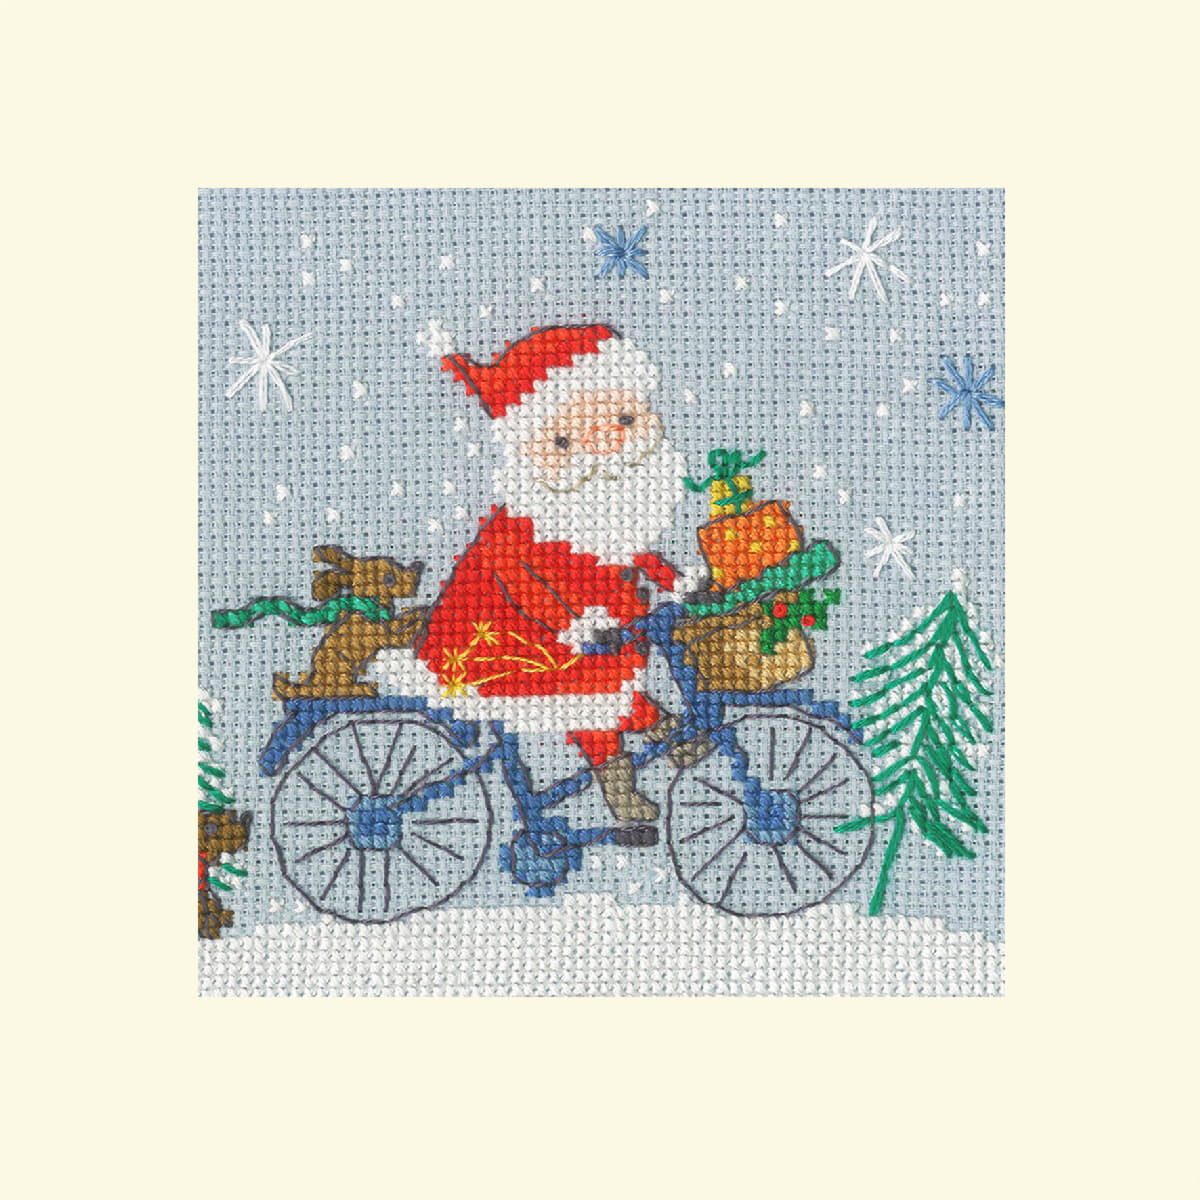 A cross-stitch picture of Santa Claus riding his bike in...